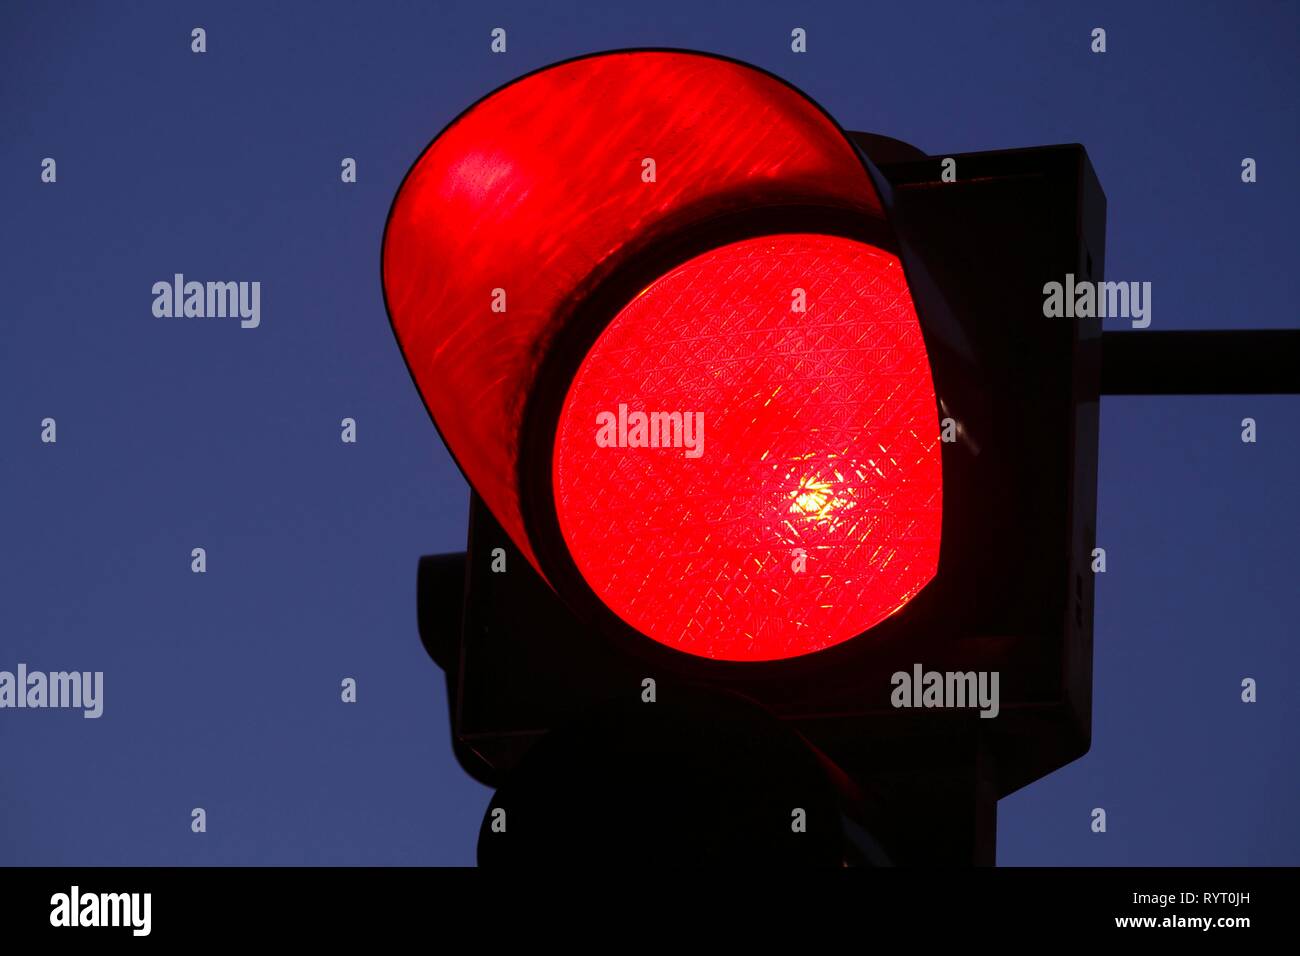 Traffic light shows red at dusk, Germany Stock Photo